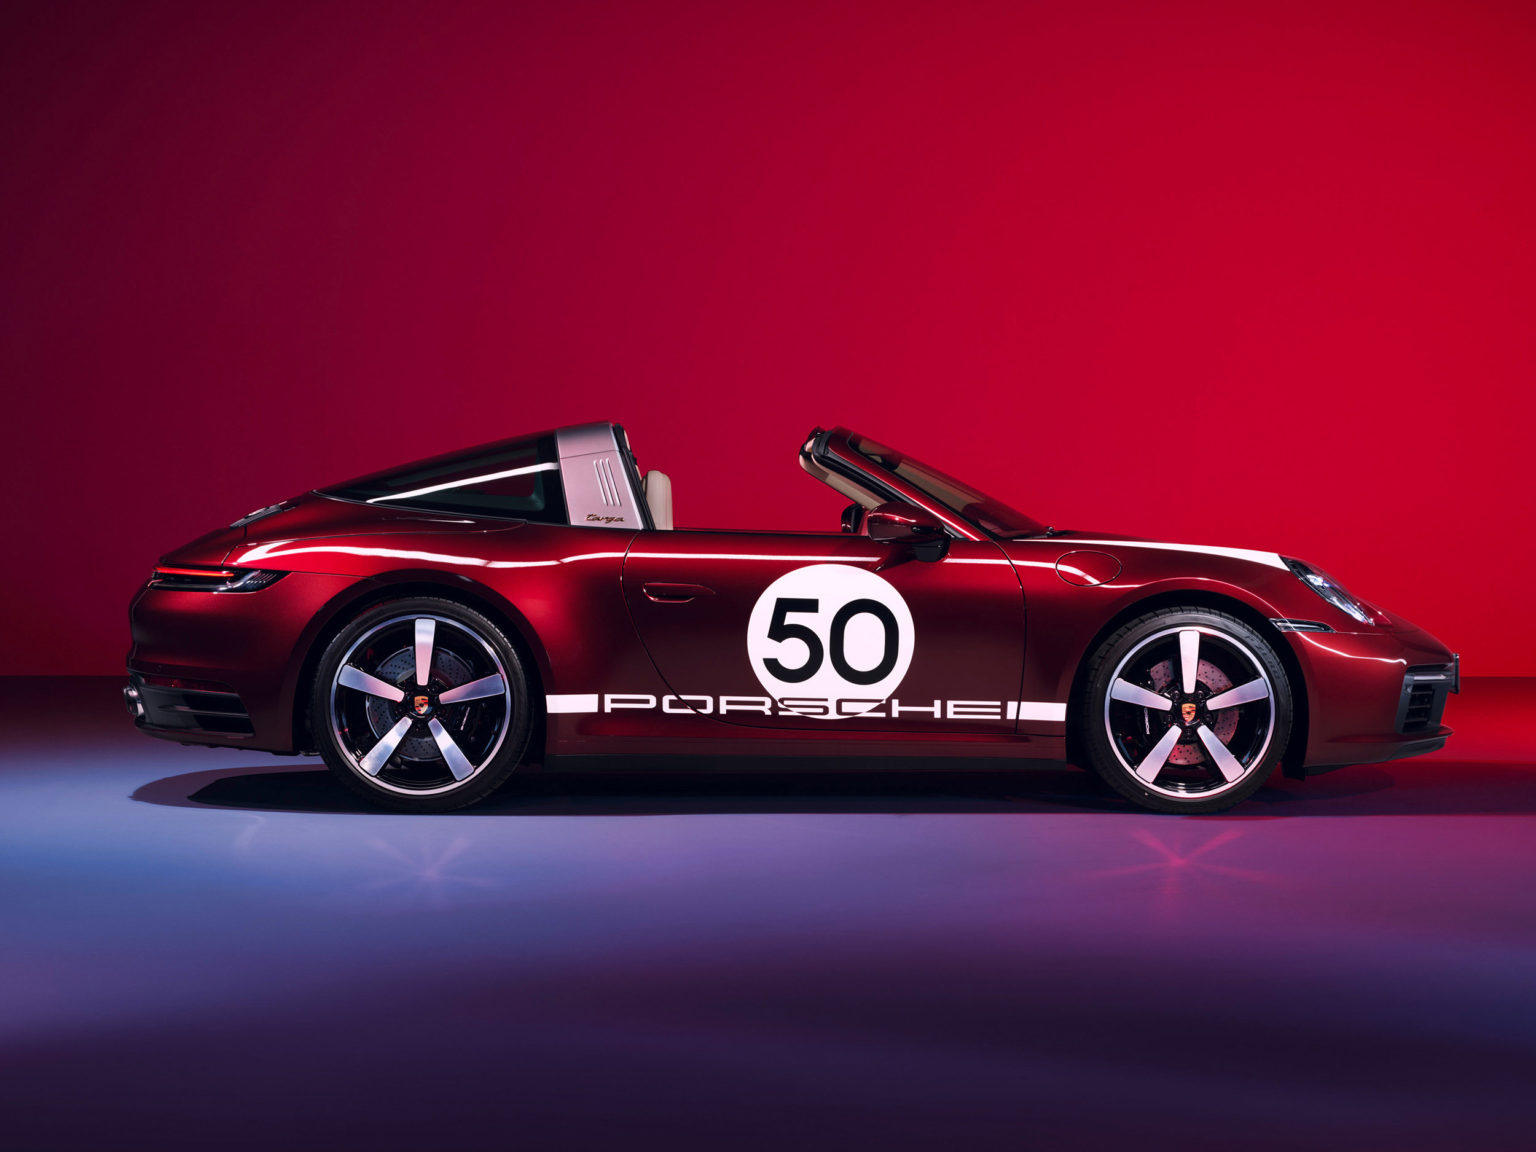 Porsche has created a 992 911 that combines heritage and modern drivability.